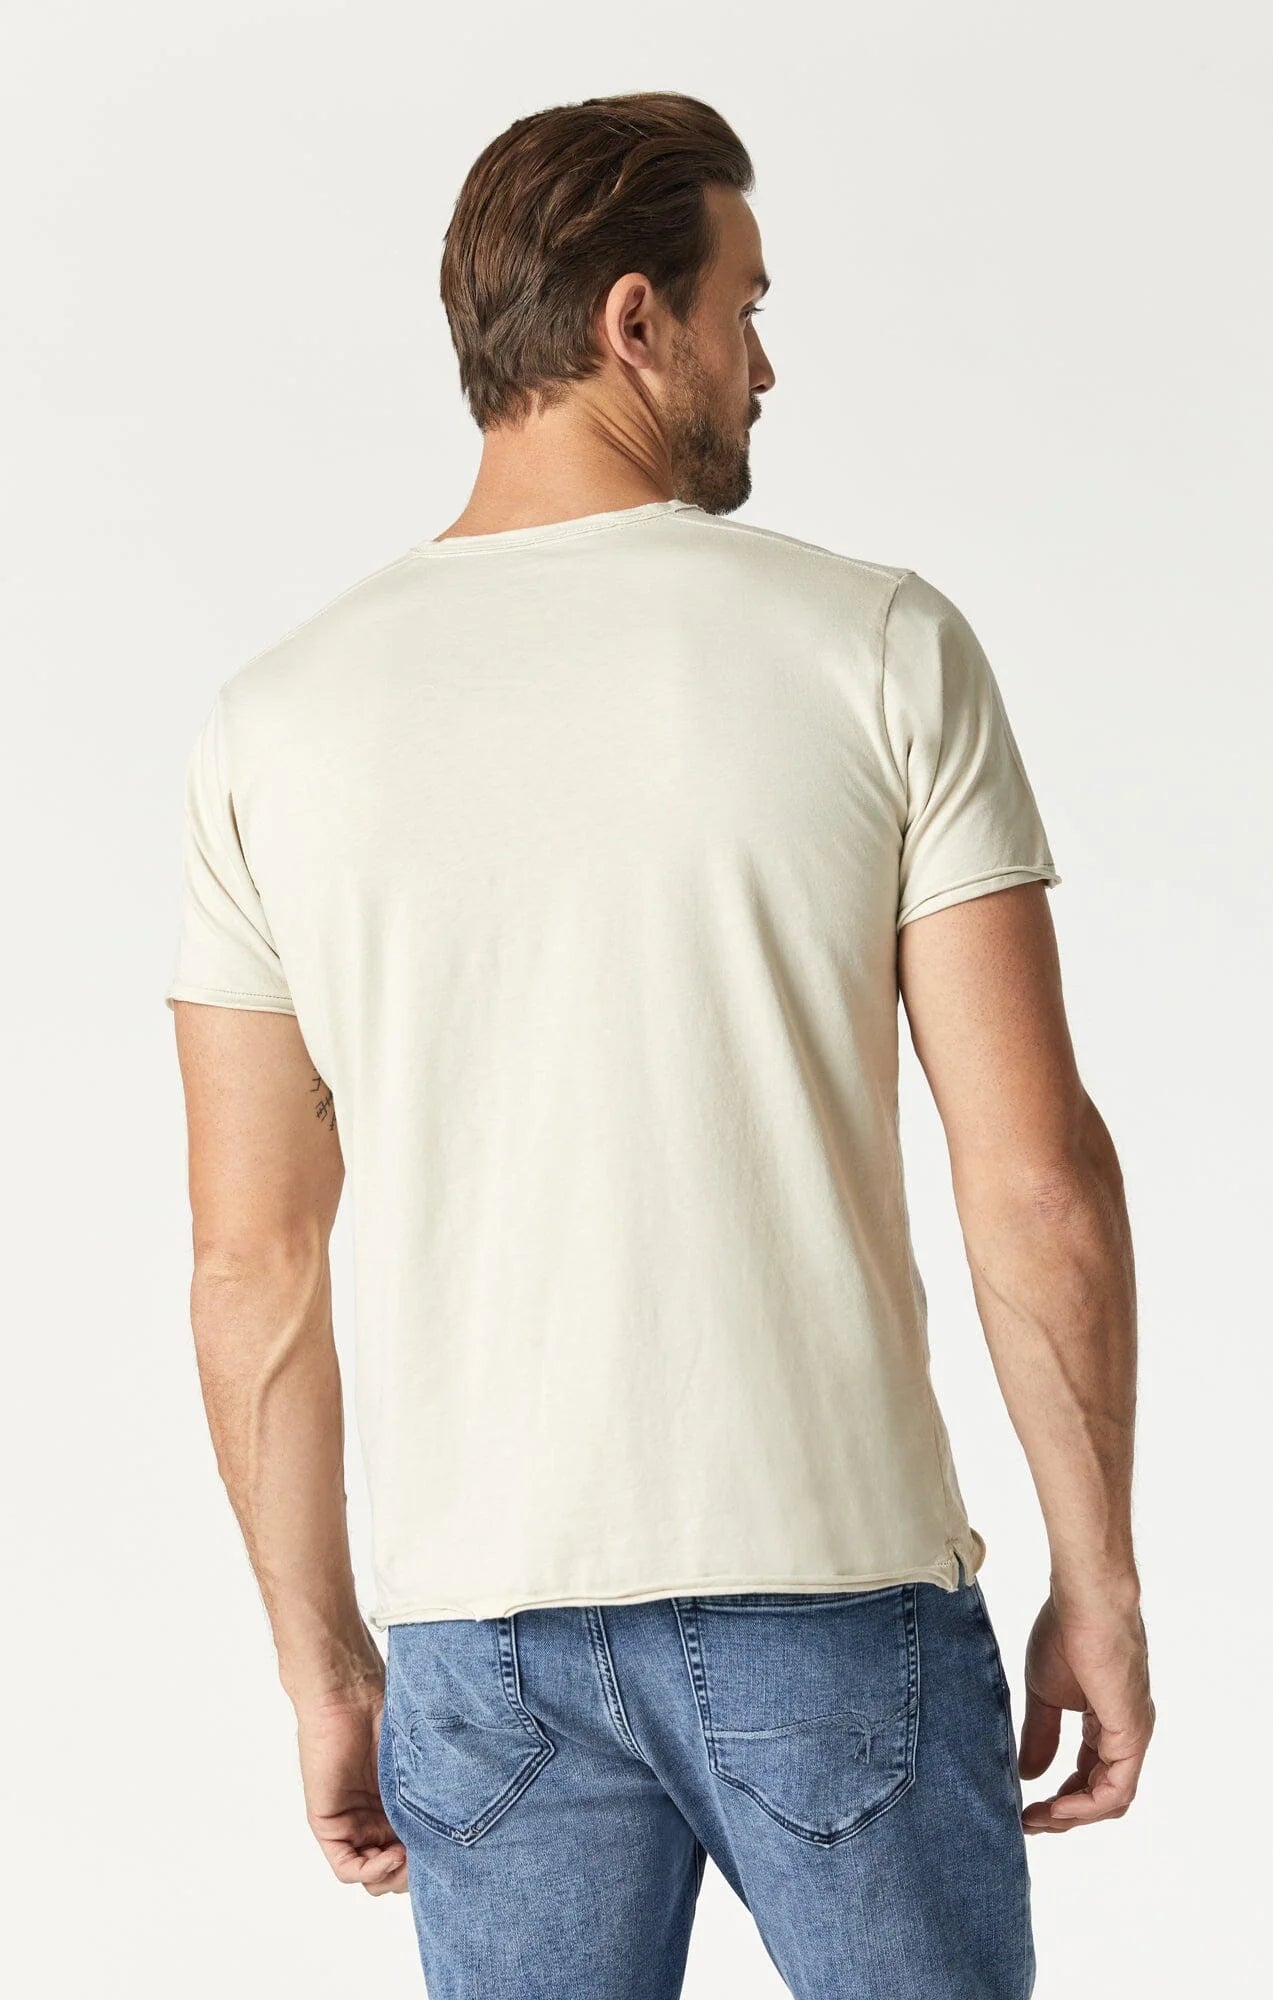 Raw Edge Crew Neck T-Shirt
Relaxed Fit | Pelican